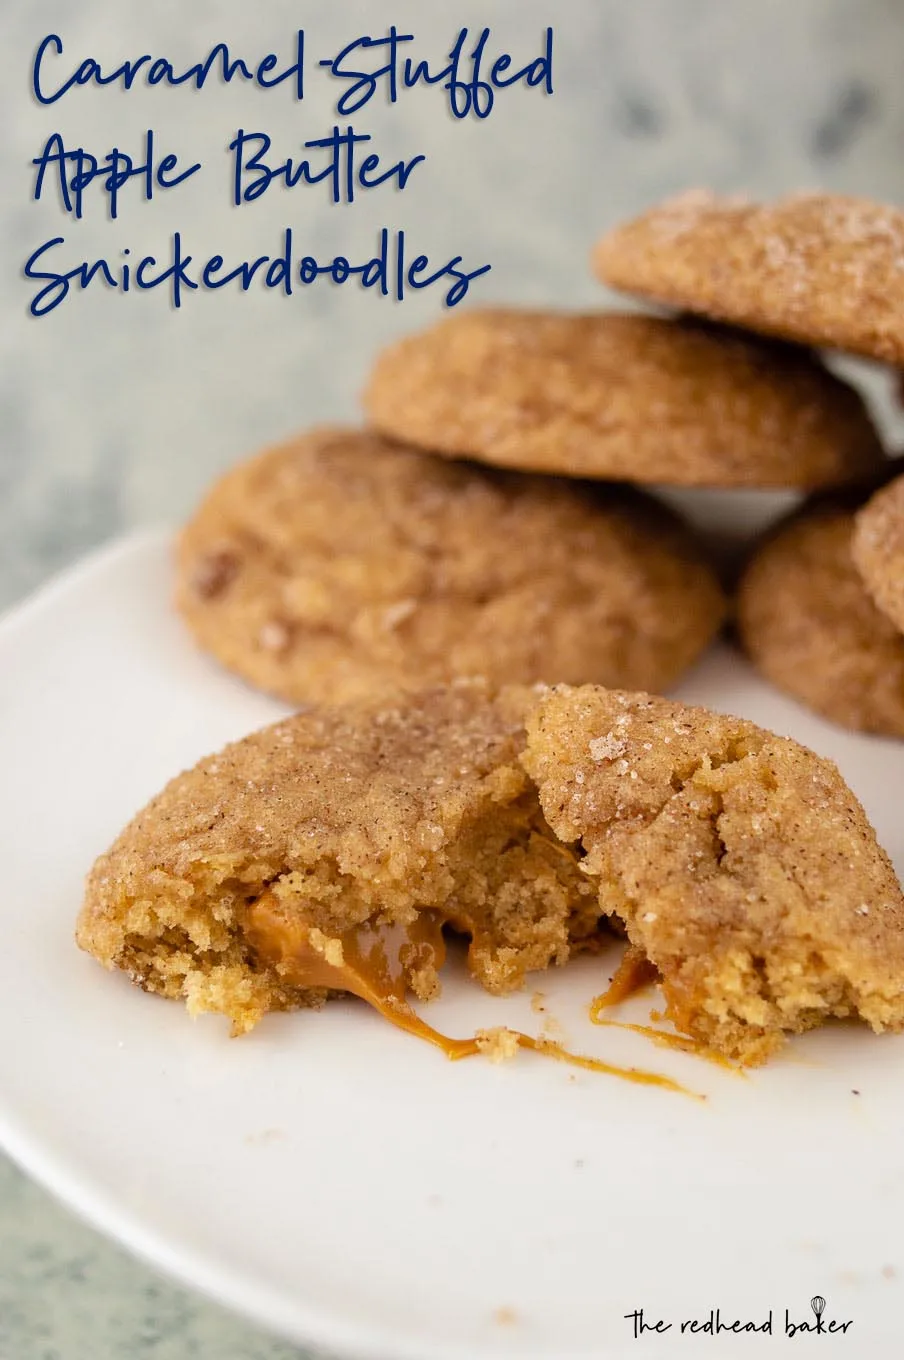 Half of a caramel-stuffed apple butter snickerdoodle with the caramel center oozing out